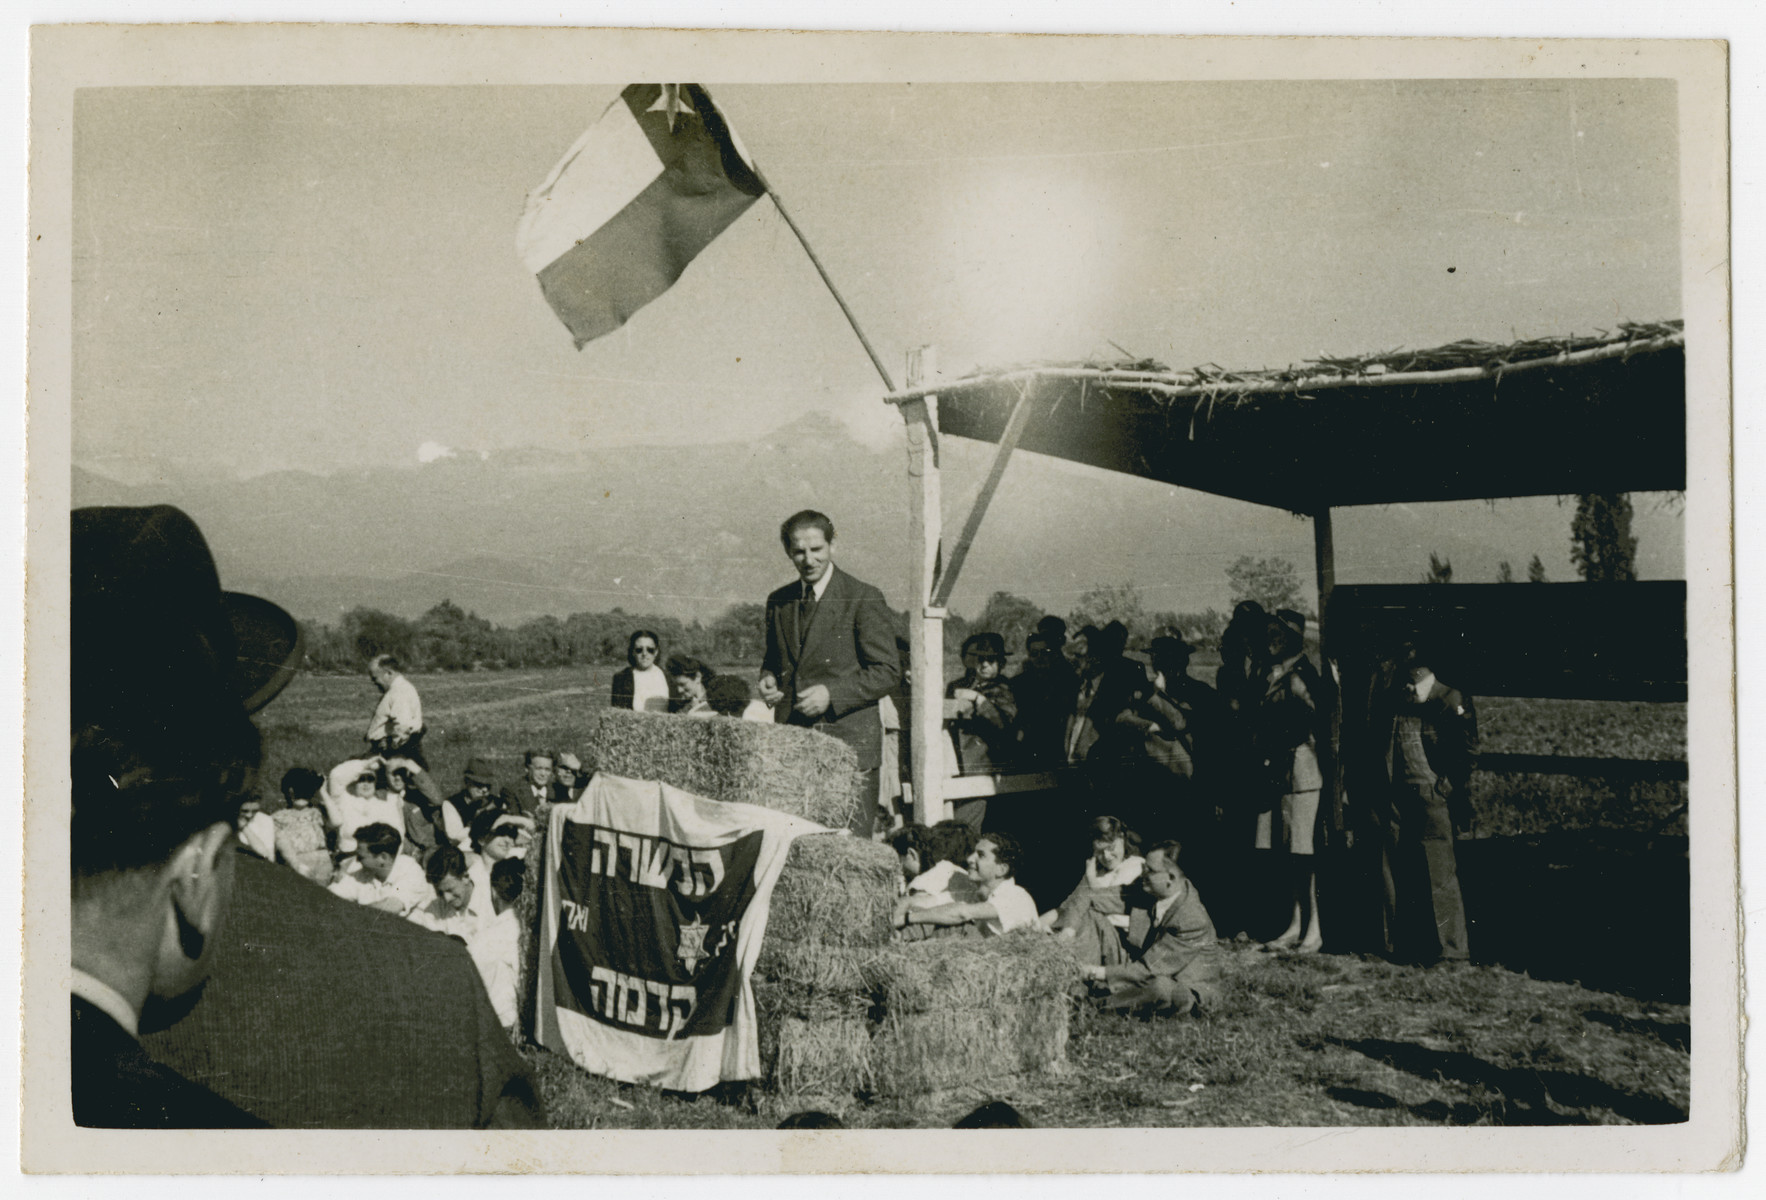 Photograph from an album entitled, "Hacshara Kidma Chile,"  documenting life on a postwar Shomer Hatzair Zionist agricultural collective in Chile.

A man addresses the crowd from a strawbale podium, under the Chilean flag.  The inscription on the back reads, "Jose Tchormitzki Meseico."  The Hebrew banner says Hachshara Kedma.